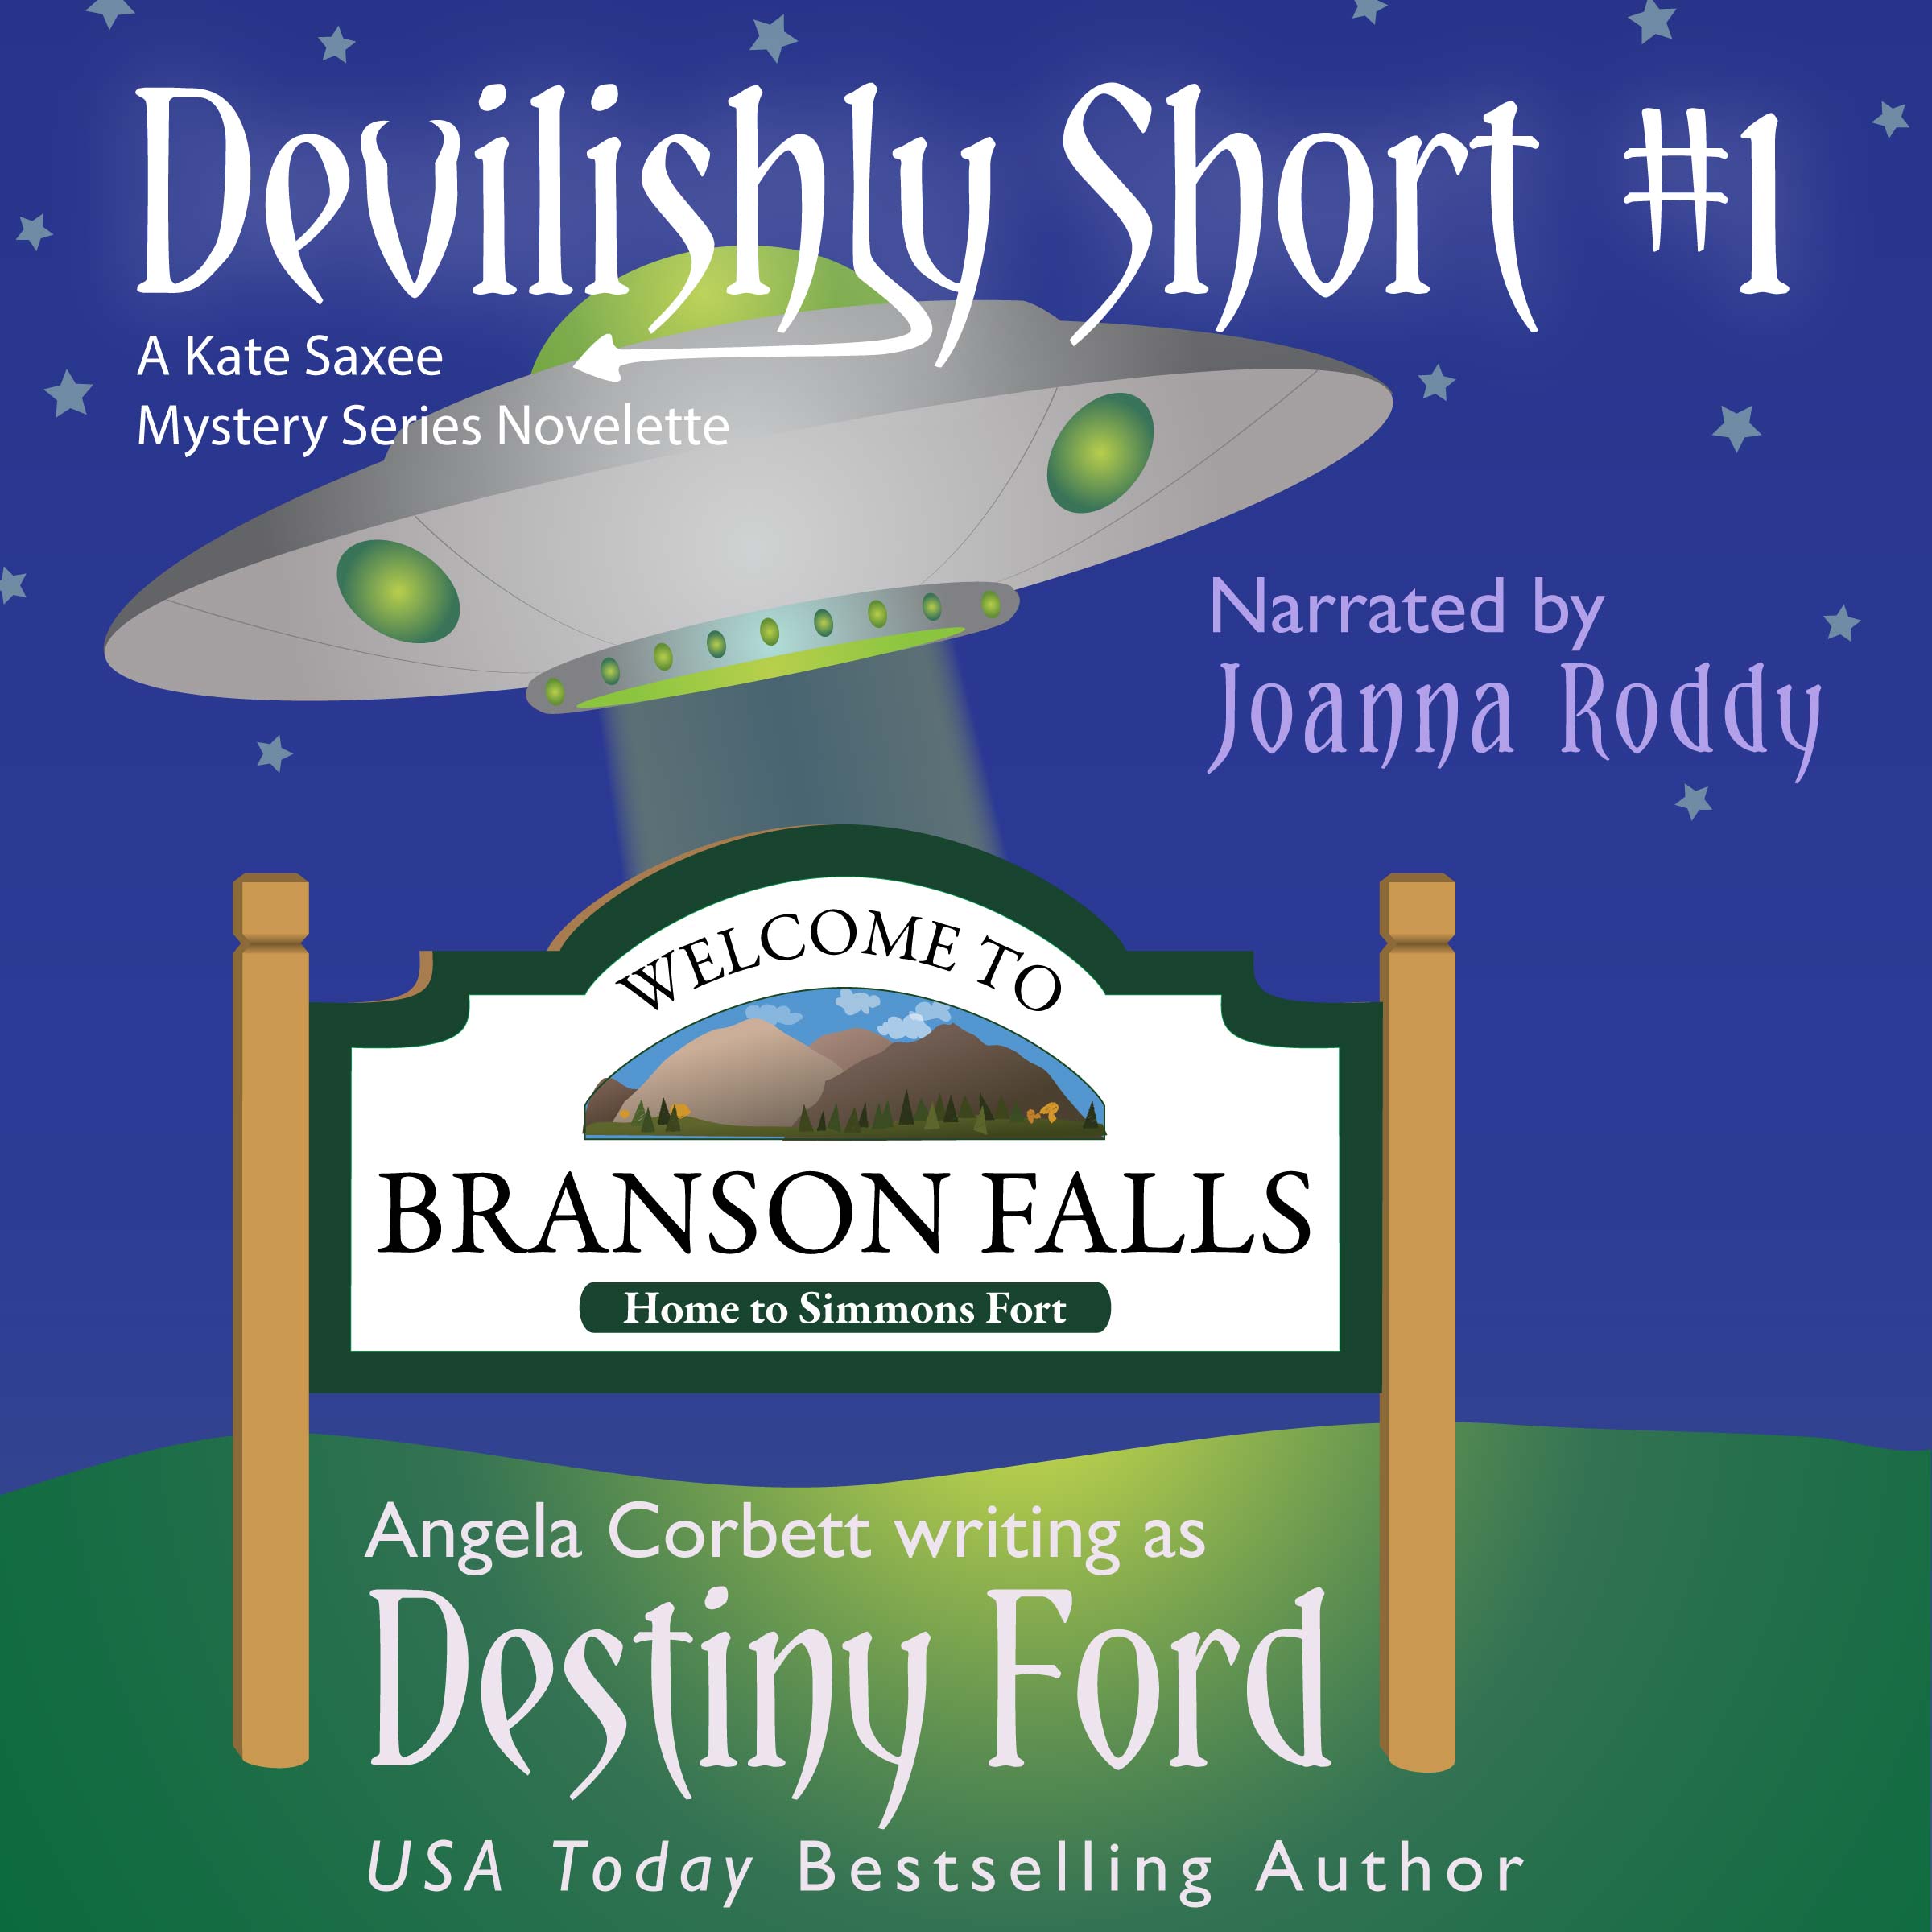 Devilishly Short #1, A Kate Saxee Mystery Series (eBook and Audiobook)